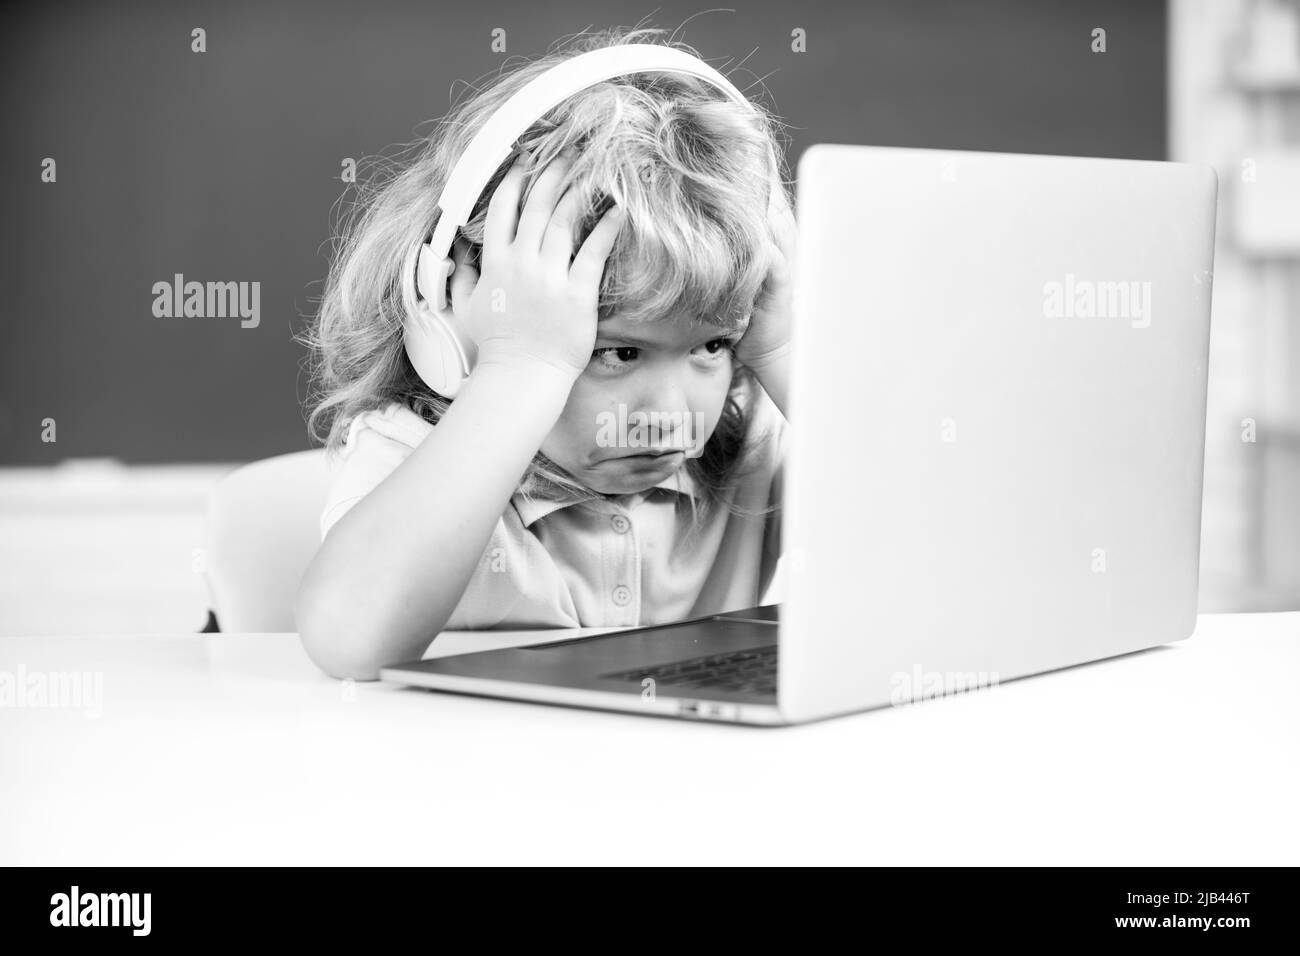 Angry sad boy in headphones sit at desk, study online on laptop at school, klever kid wear earphones in notebook learning using internet lessons. Stock Photo